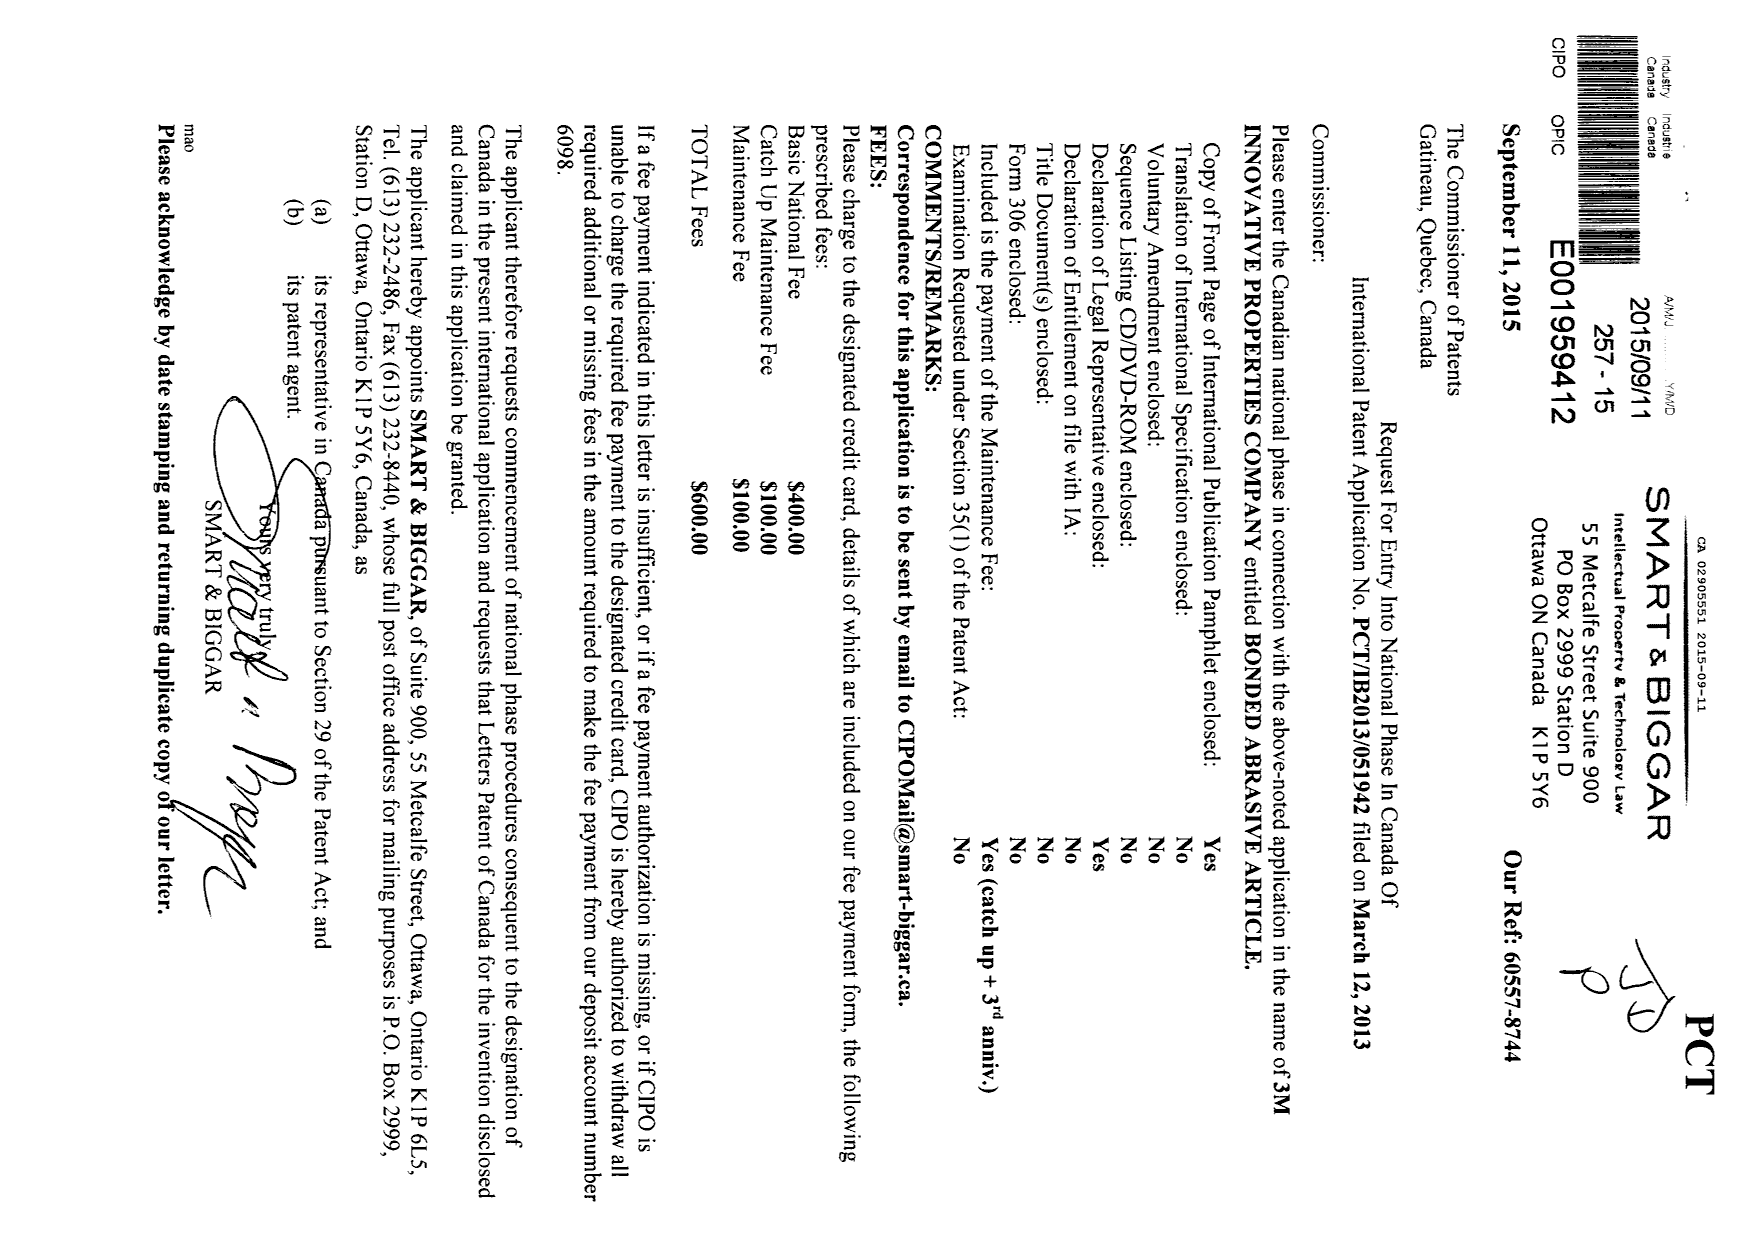 Canadian Patent Document 2905551. National Entry Request 20150911. Image 1 of 2